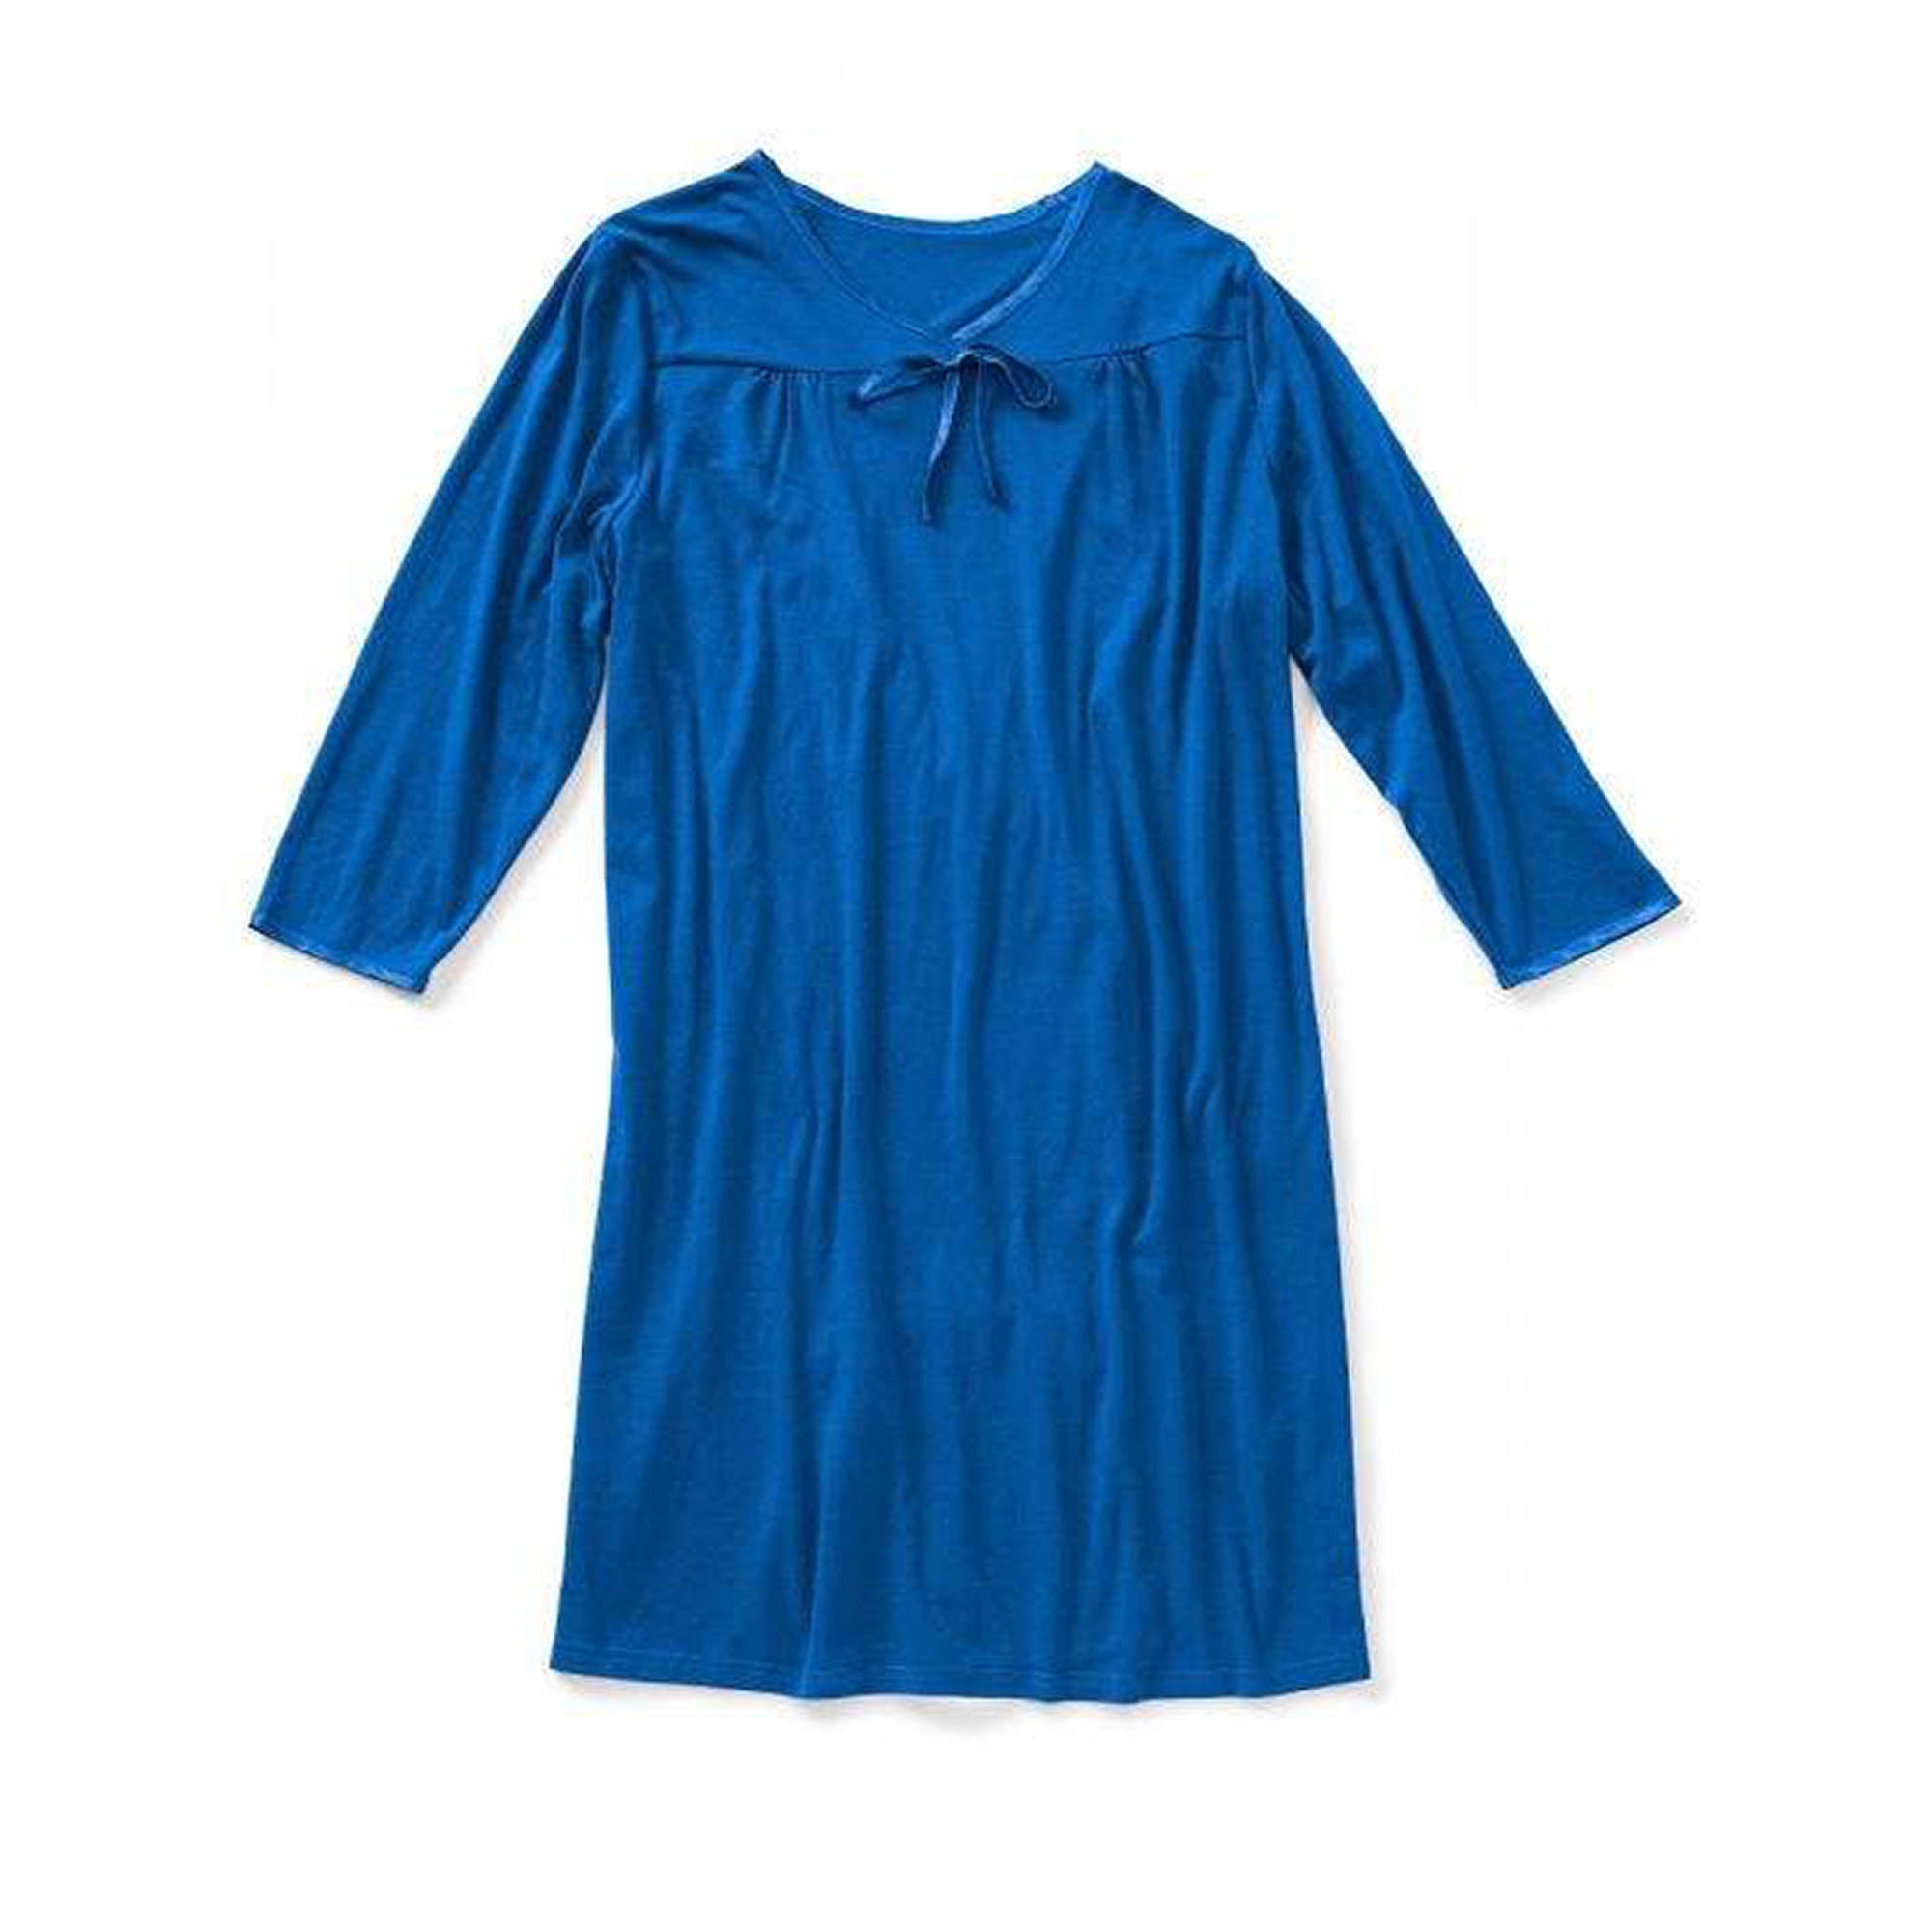 Silverts Women's Open Back Antimicrobial Long-sleeve Nightgown - Adaptive Clothing - Blue - M